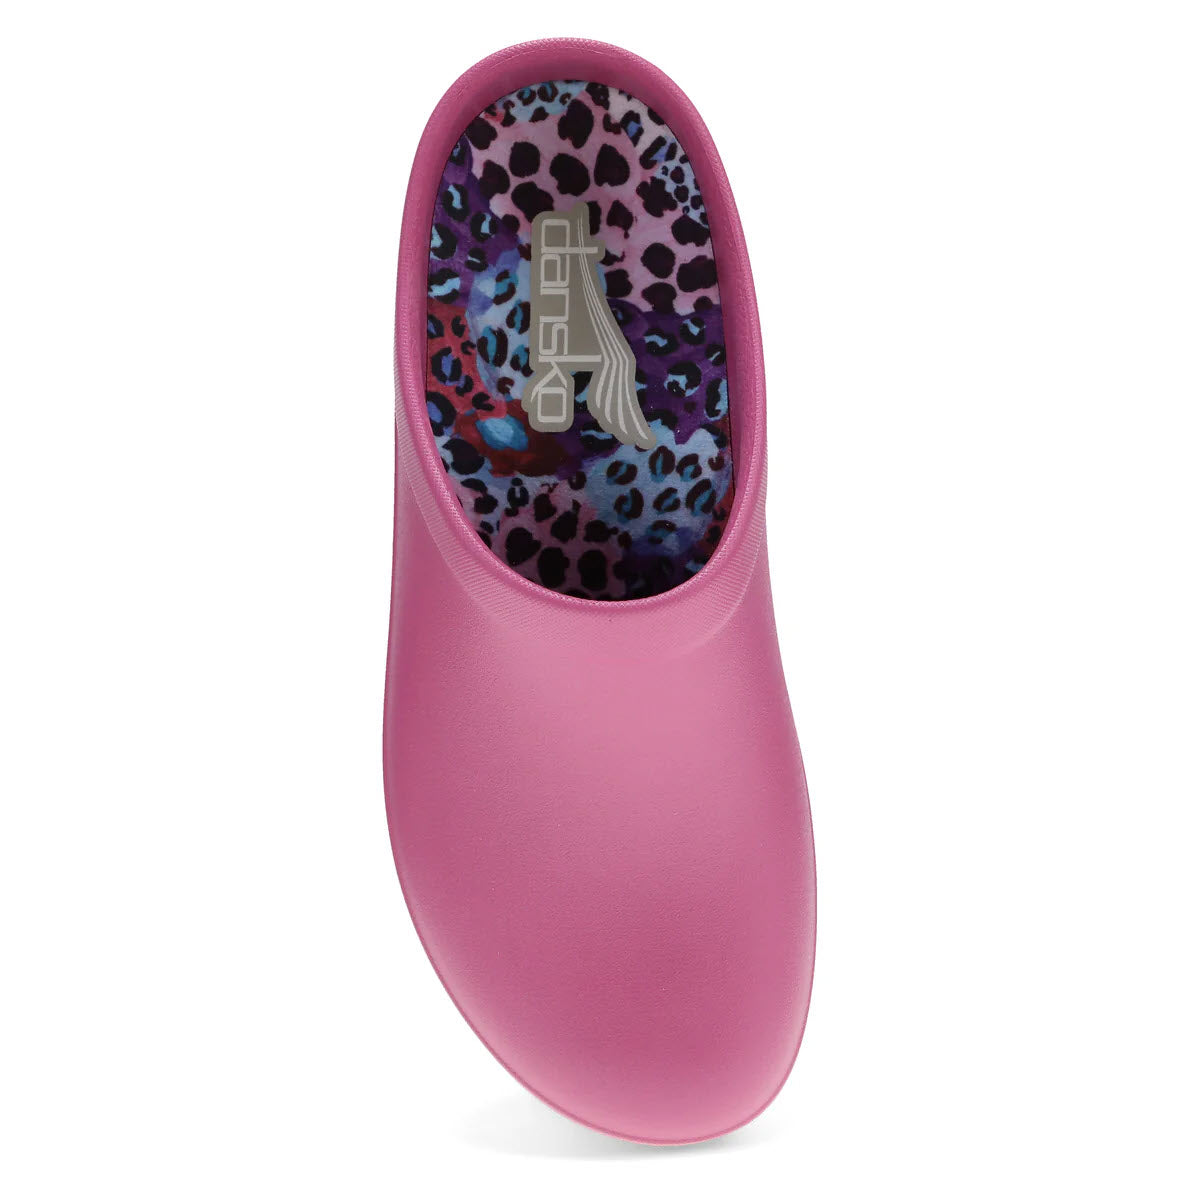 Sentence with the product replaced: Dansko Kaci Fuchsia slip-on shoe with a colorful leopard print insole, featuring lightweight bio-based EVA for all-day comfort, displayed against a white background.